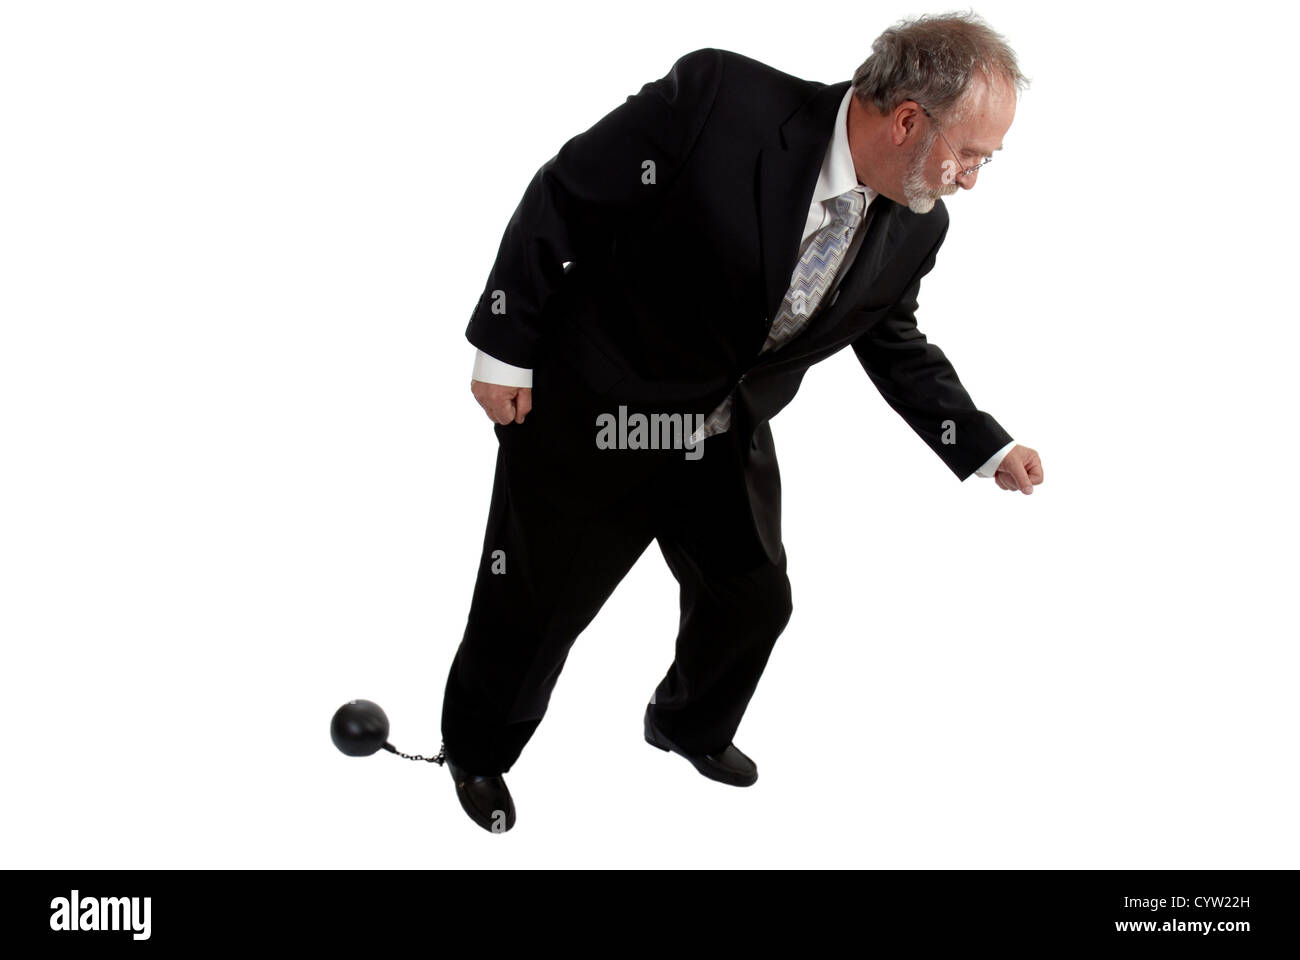 Businessman tring to move with a ball and chain attached to his leg Stock Photo